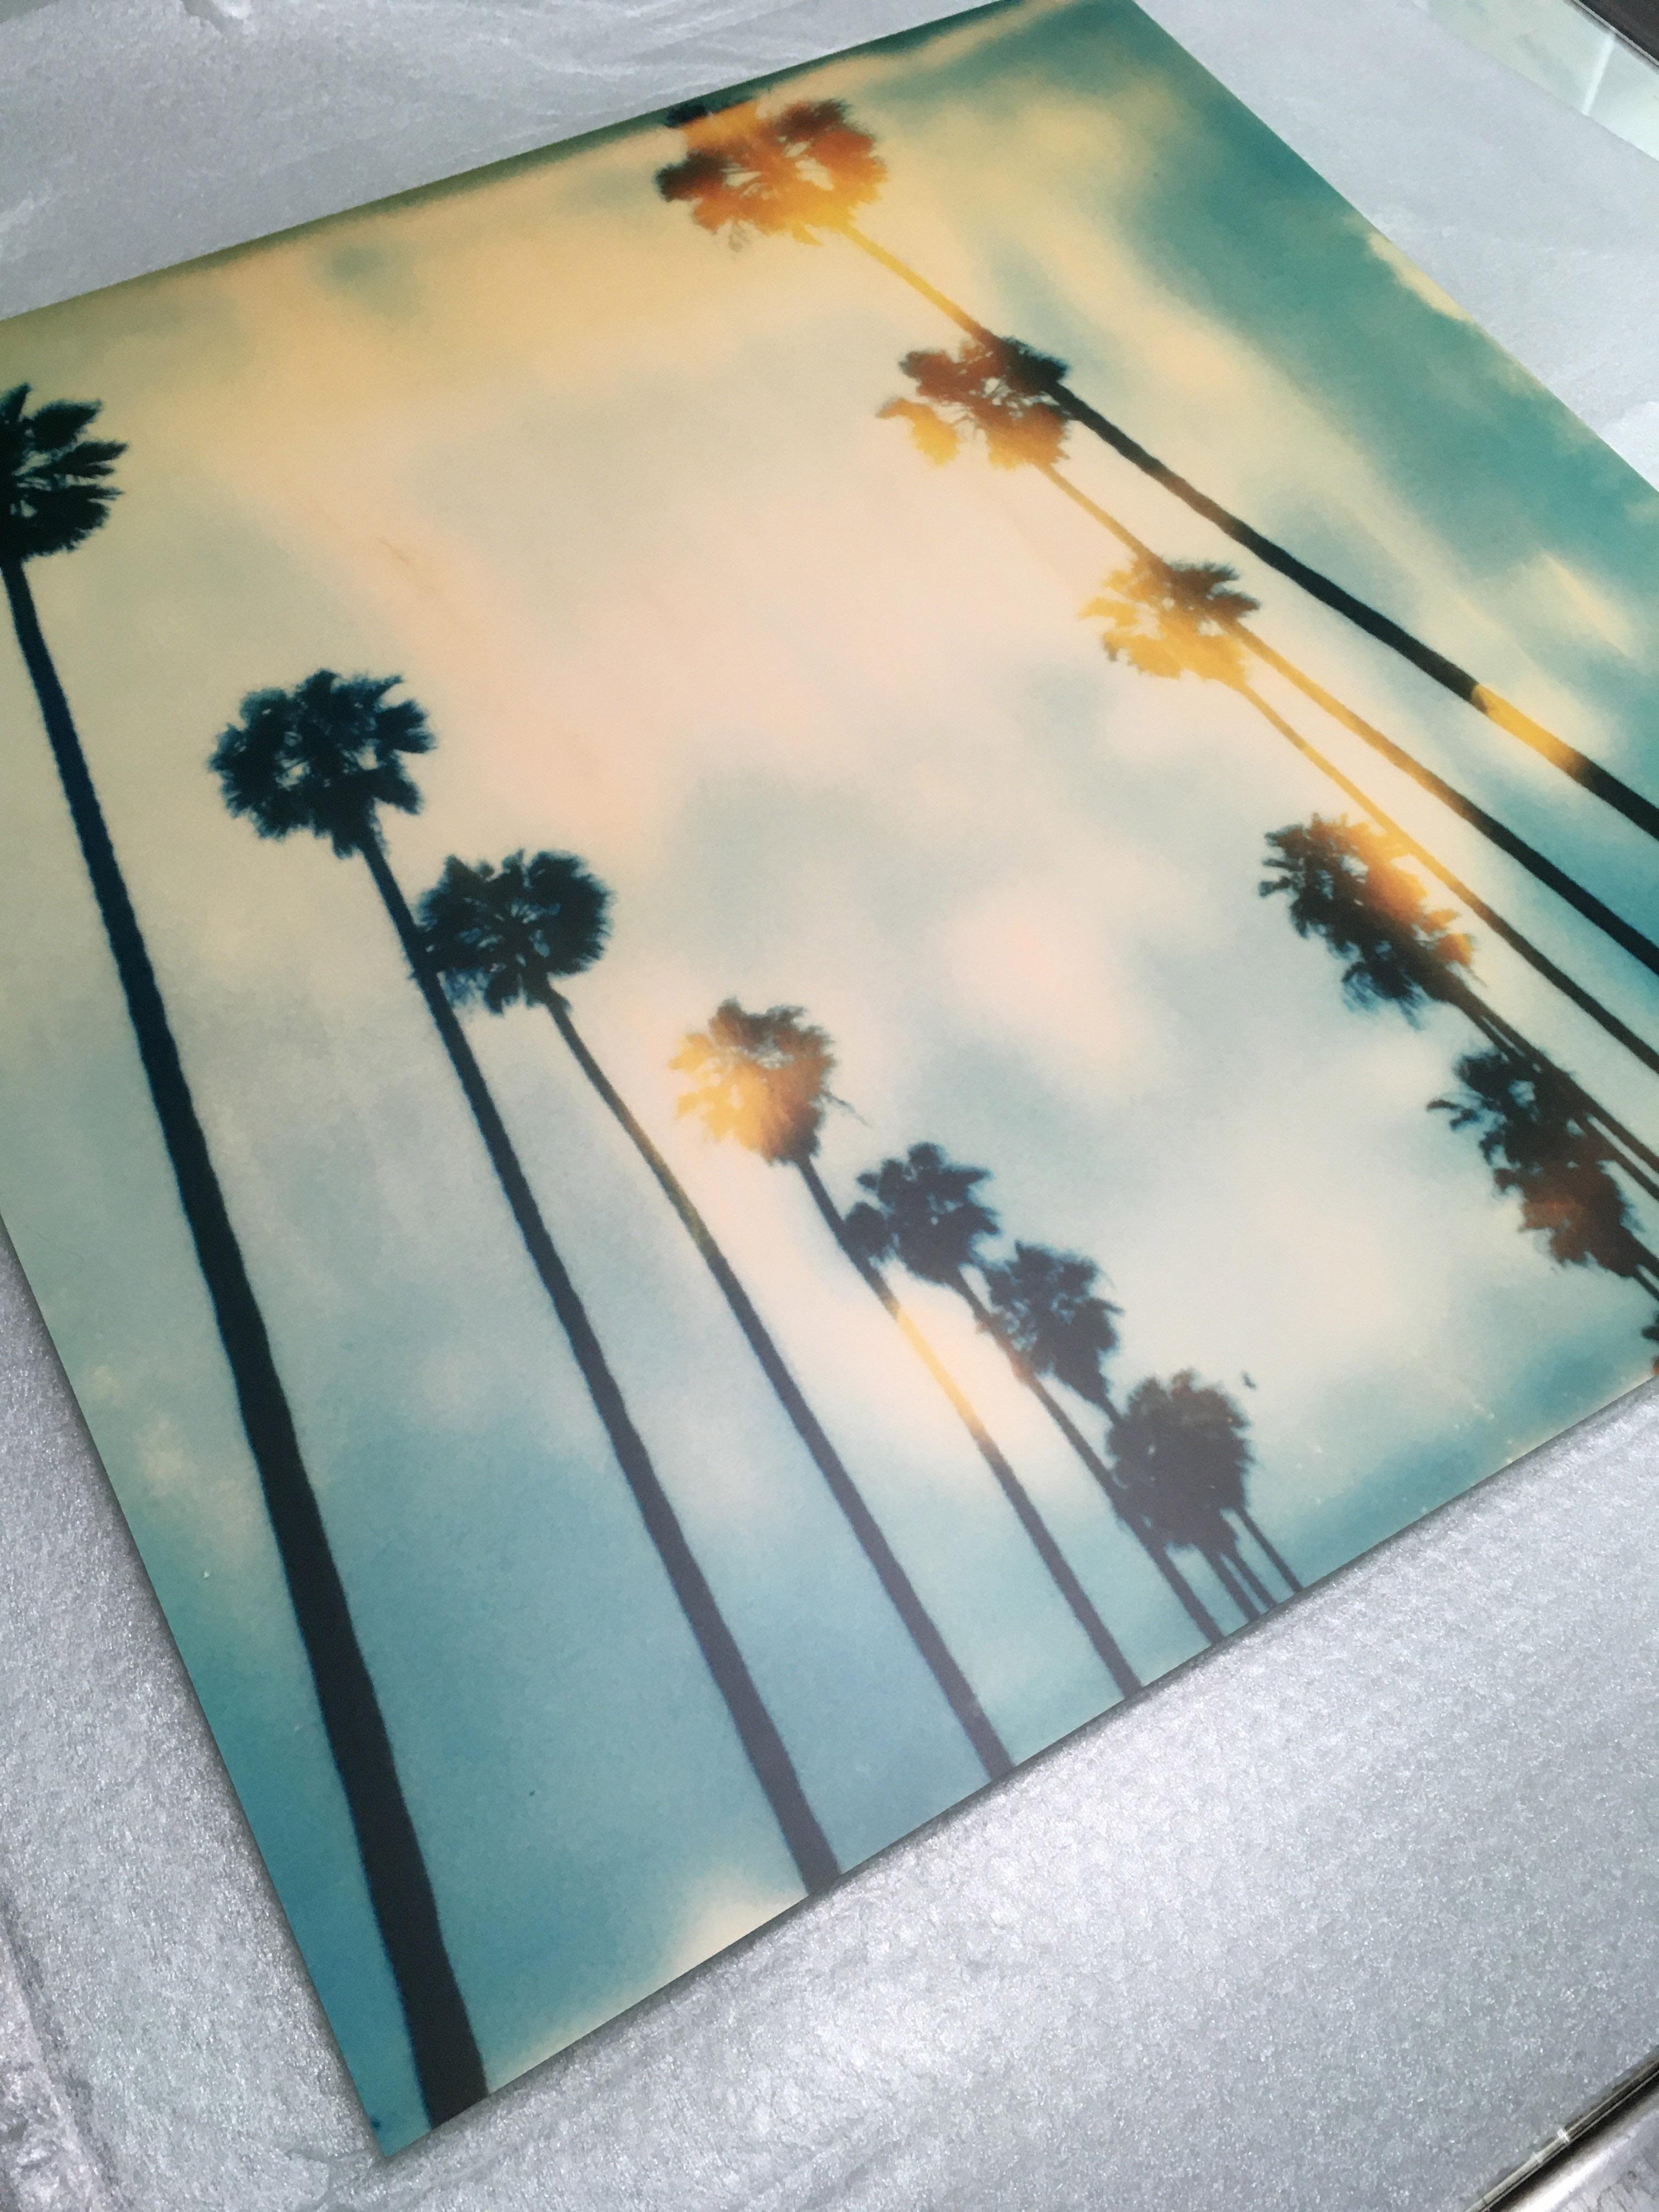 Palm Trees on Wilcox (Stranger than Paradise) - 1999

80x78cm,  
Edition of 31/100. 
Archival C-Print based on a Polaroid.
Mounted on Dibond with matte UV-Protection. 
Certificate and signature label, artist inventory number: 398. 

Stefanie